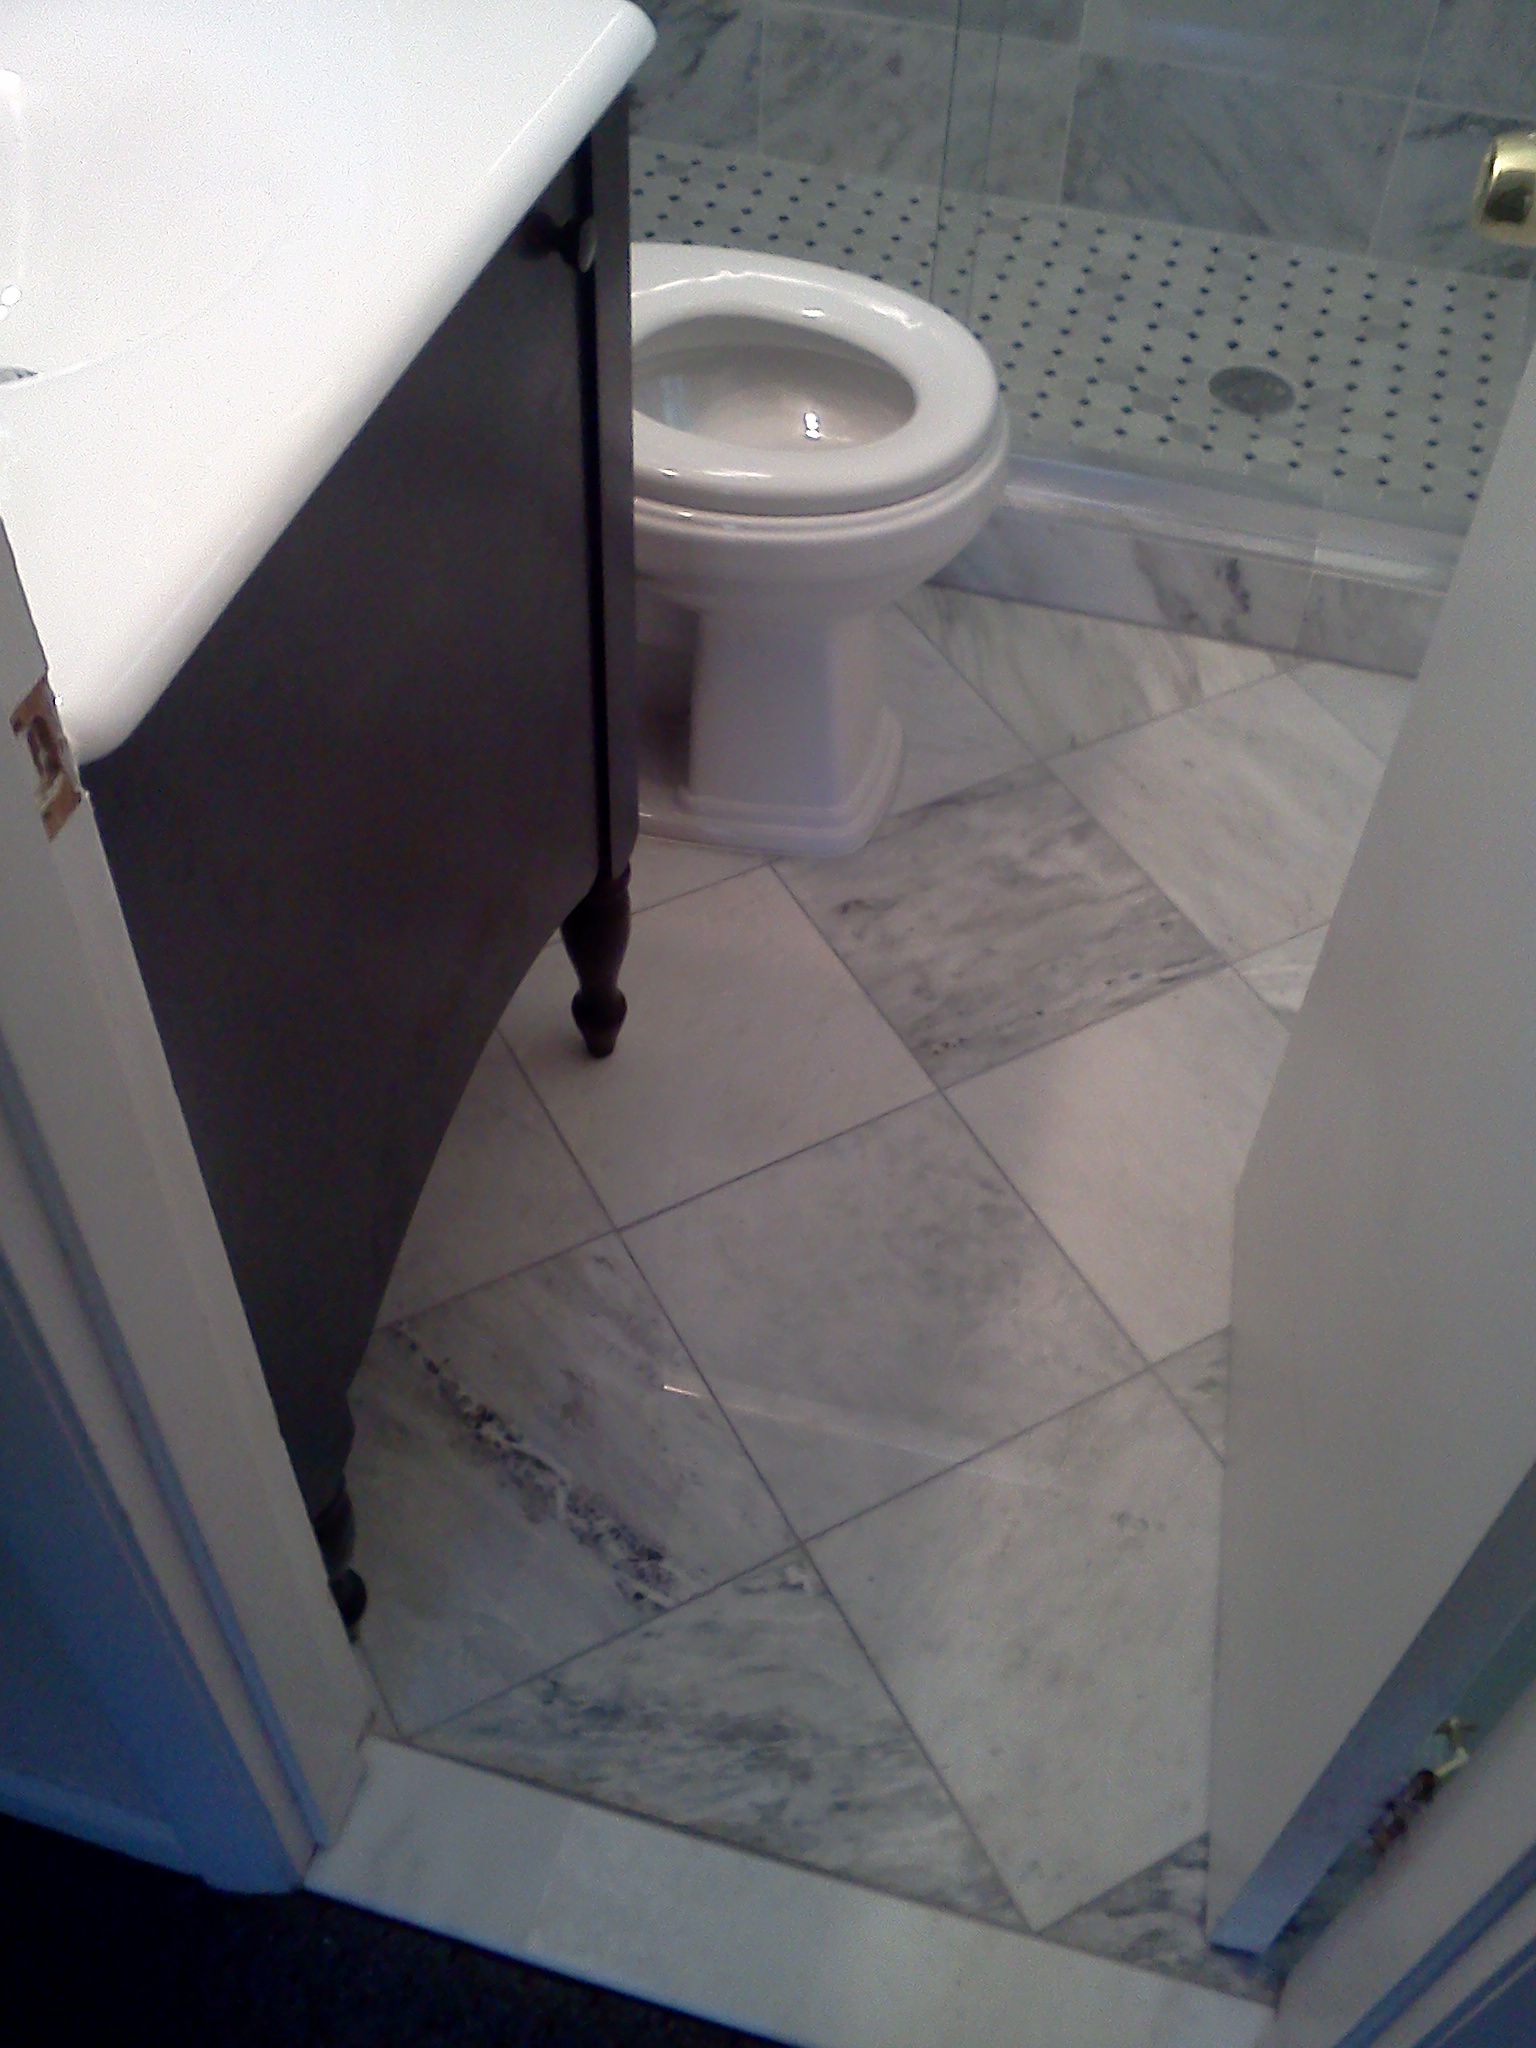 Plumbing & Clogged Drains-Frederick,MD